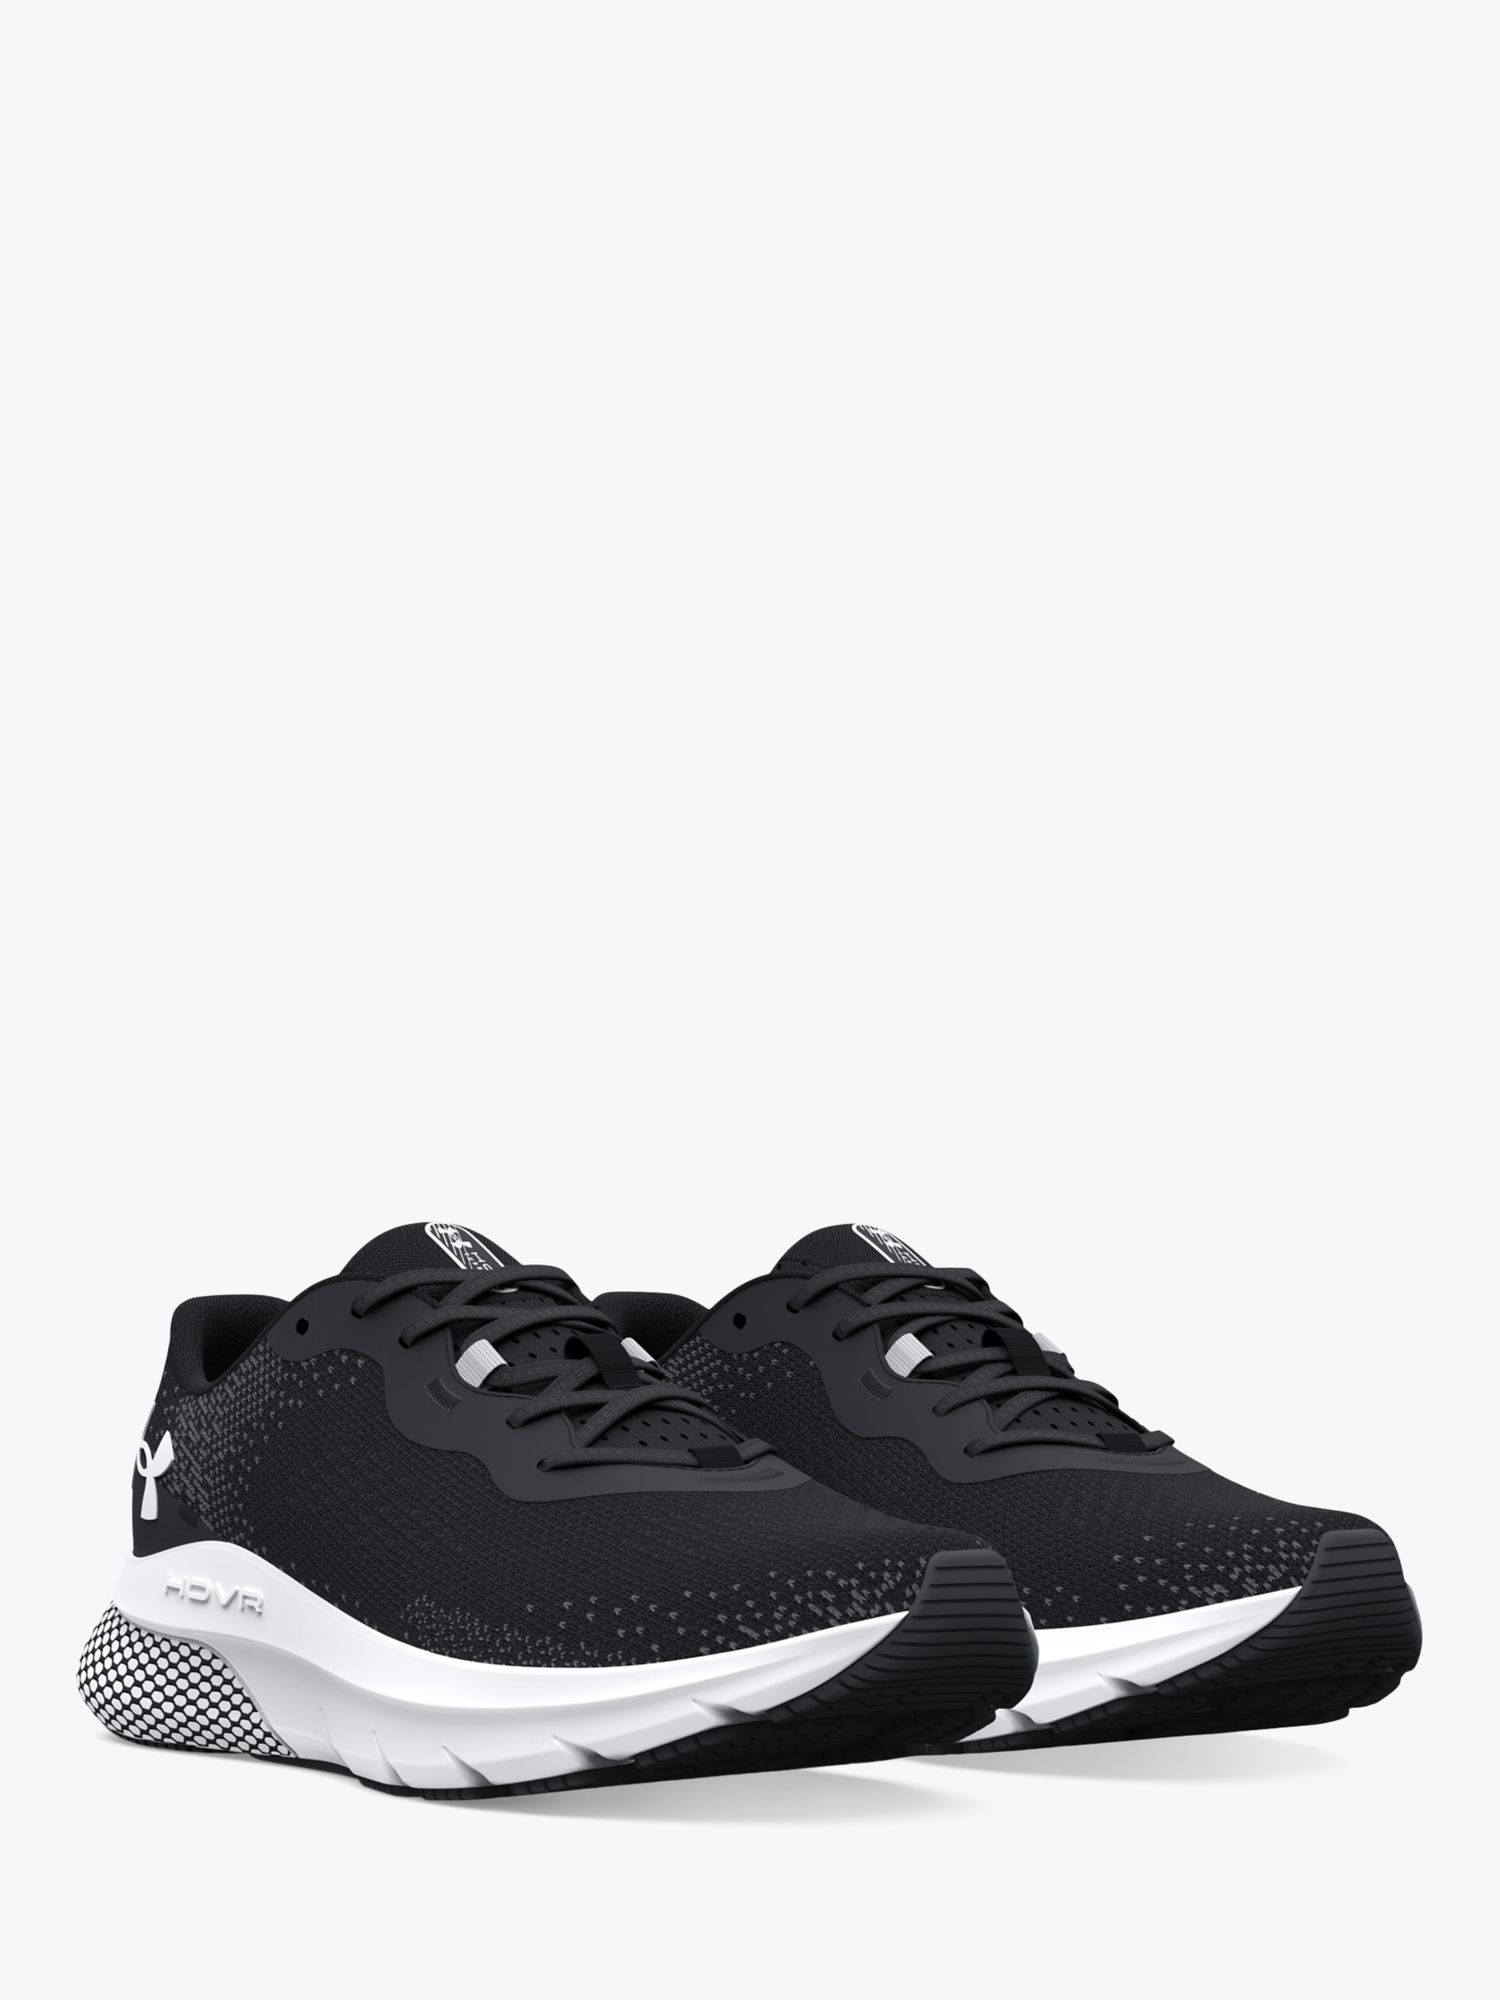 Under Armour HOVR Men's Sports Trainers, Black/White, 9